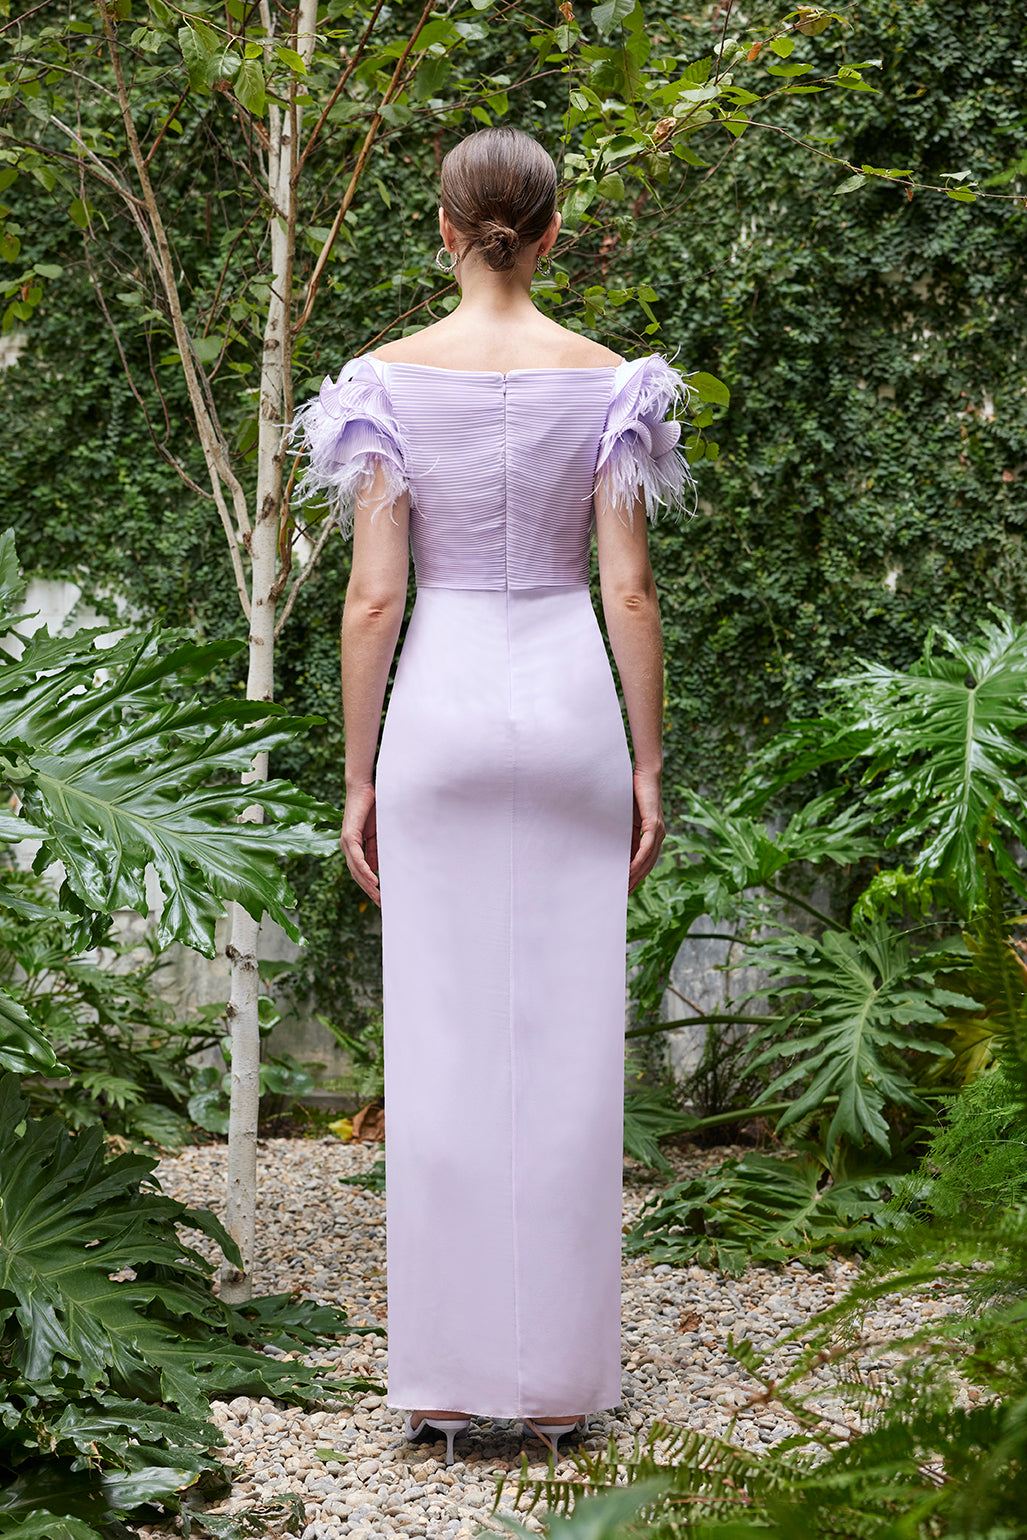 Back view of an elegant evening gown with feathered shoulders, available in lilac, dark fuchsia, and turquoise colors, showcased in a tranquil garden.